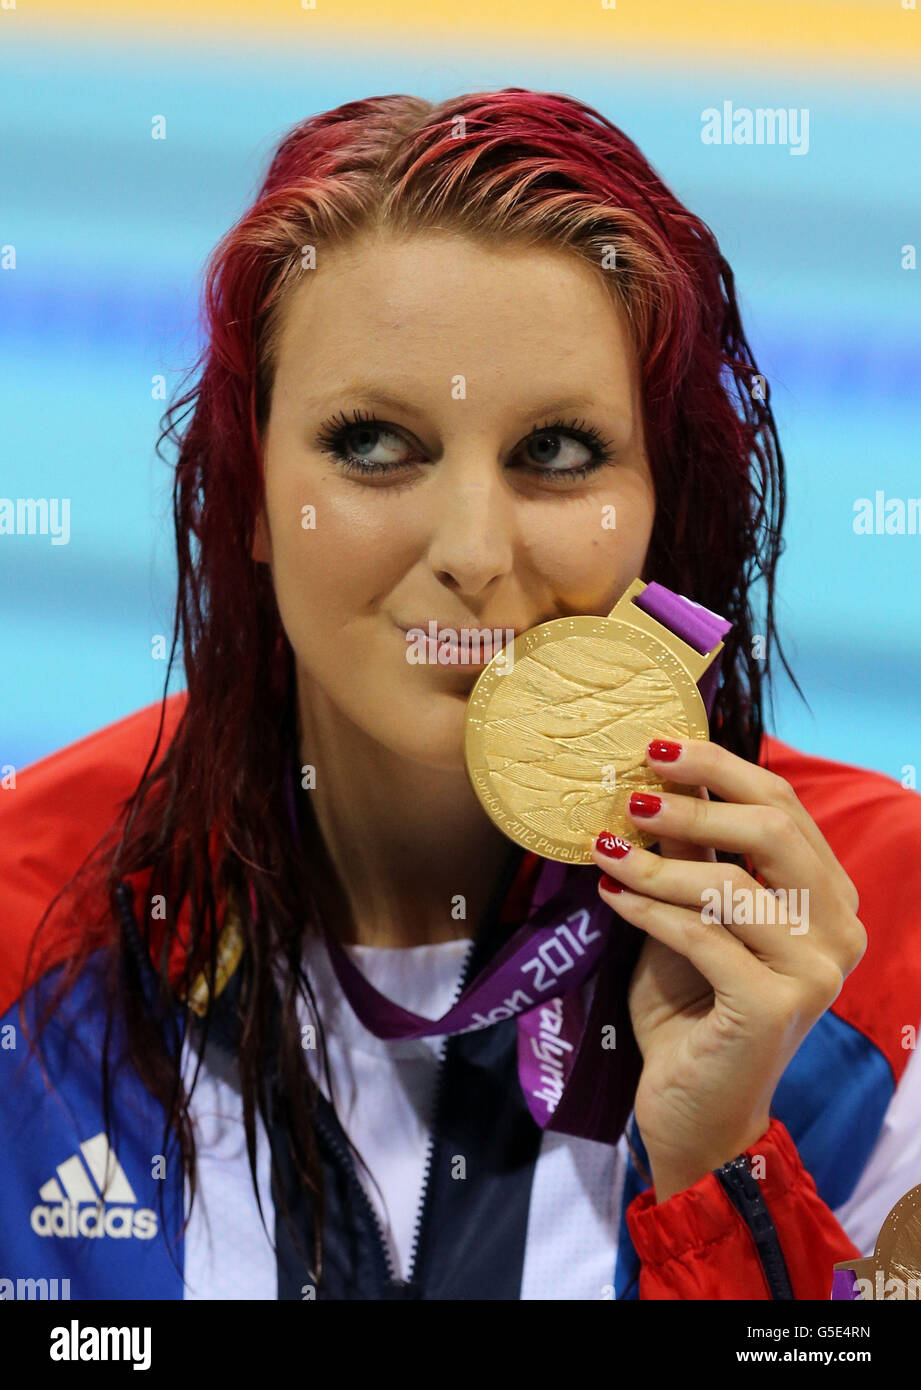 Great Britains Jessica Jane Applegate With Her Gold Medal Following Victory In The Womens 200m